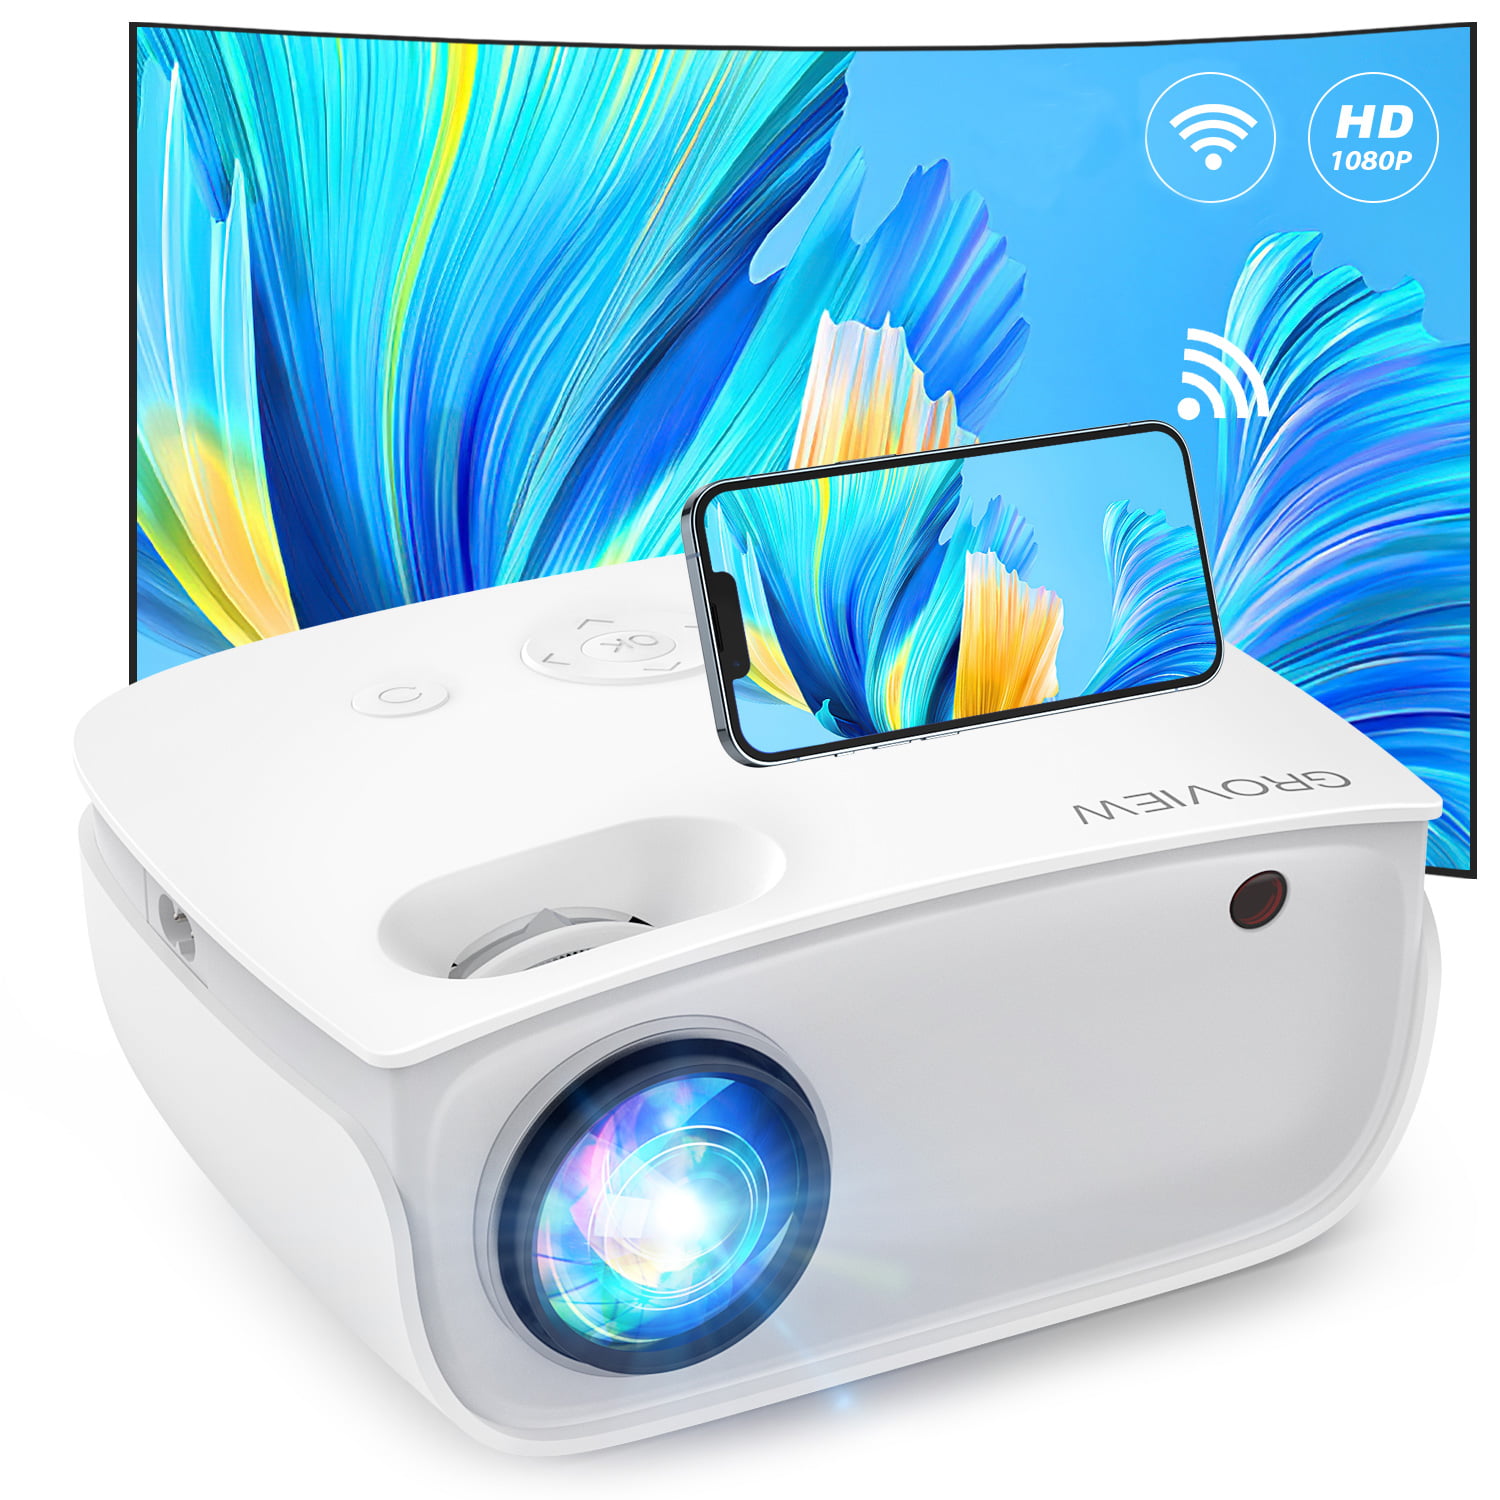 Mini WiFi Projector, 7500 Portable Movie Projector Projector Screen, 1080P & 240" Display Supported, Home Theater Projector Compatible with TV Stick, Android, iPhone - Walmart.com